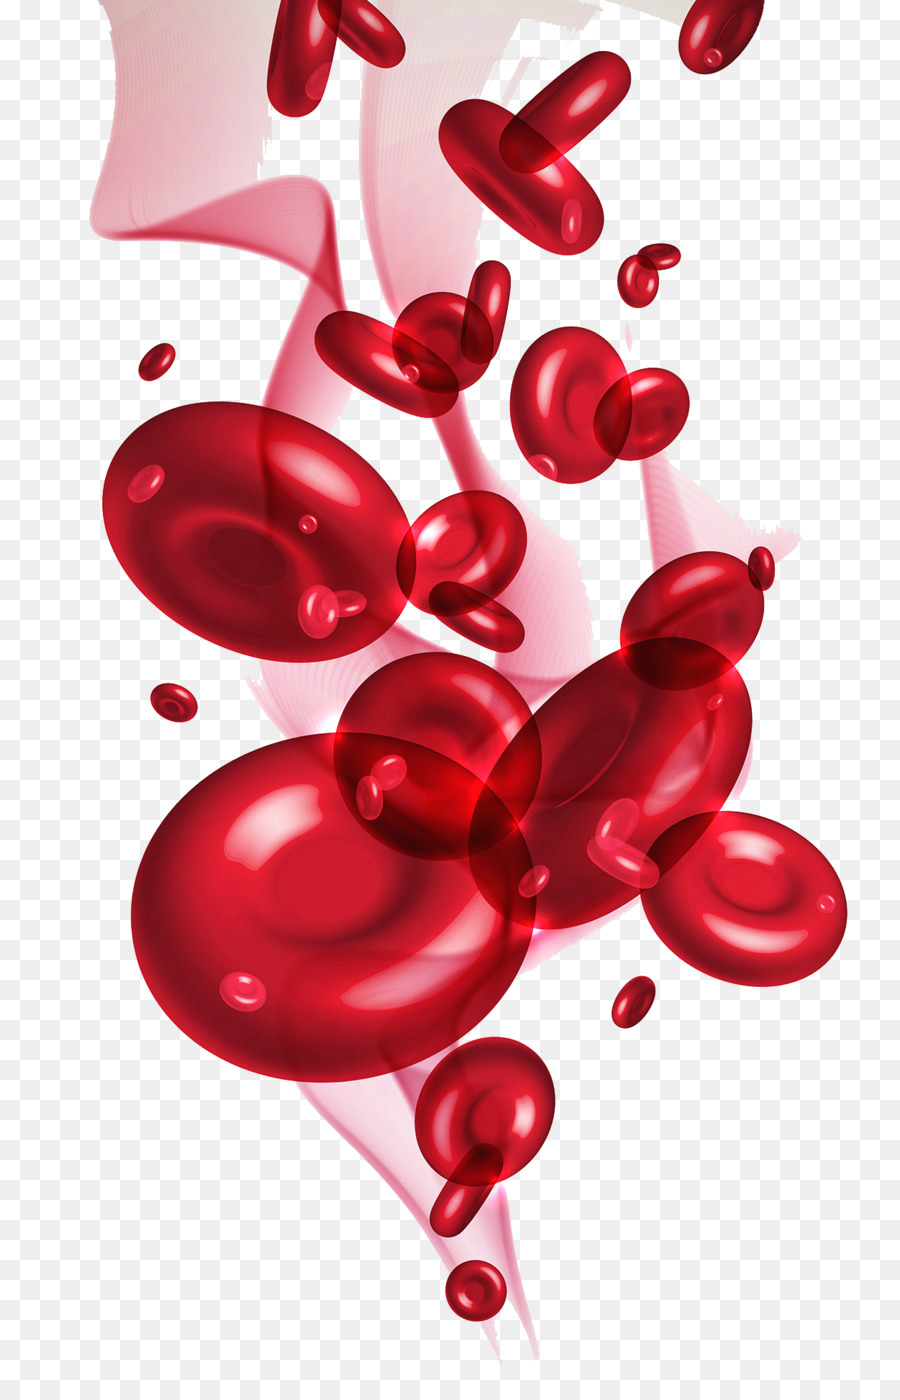 Red Blood Cell PNG - 141291